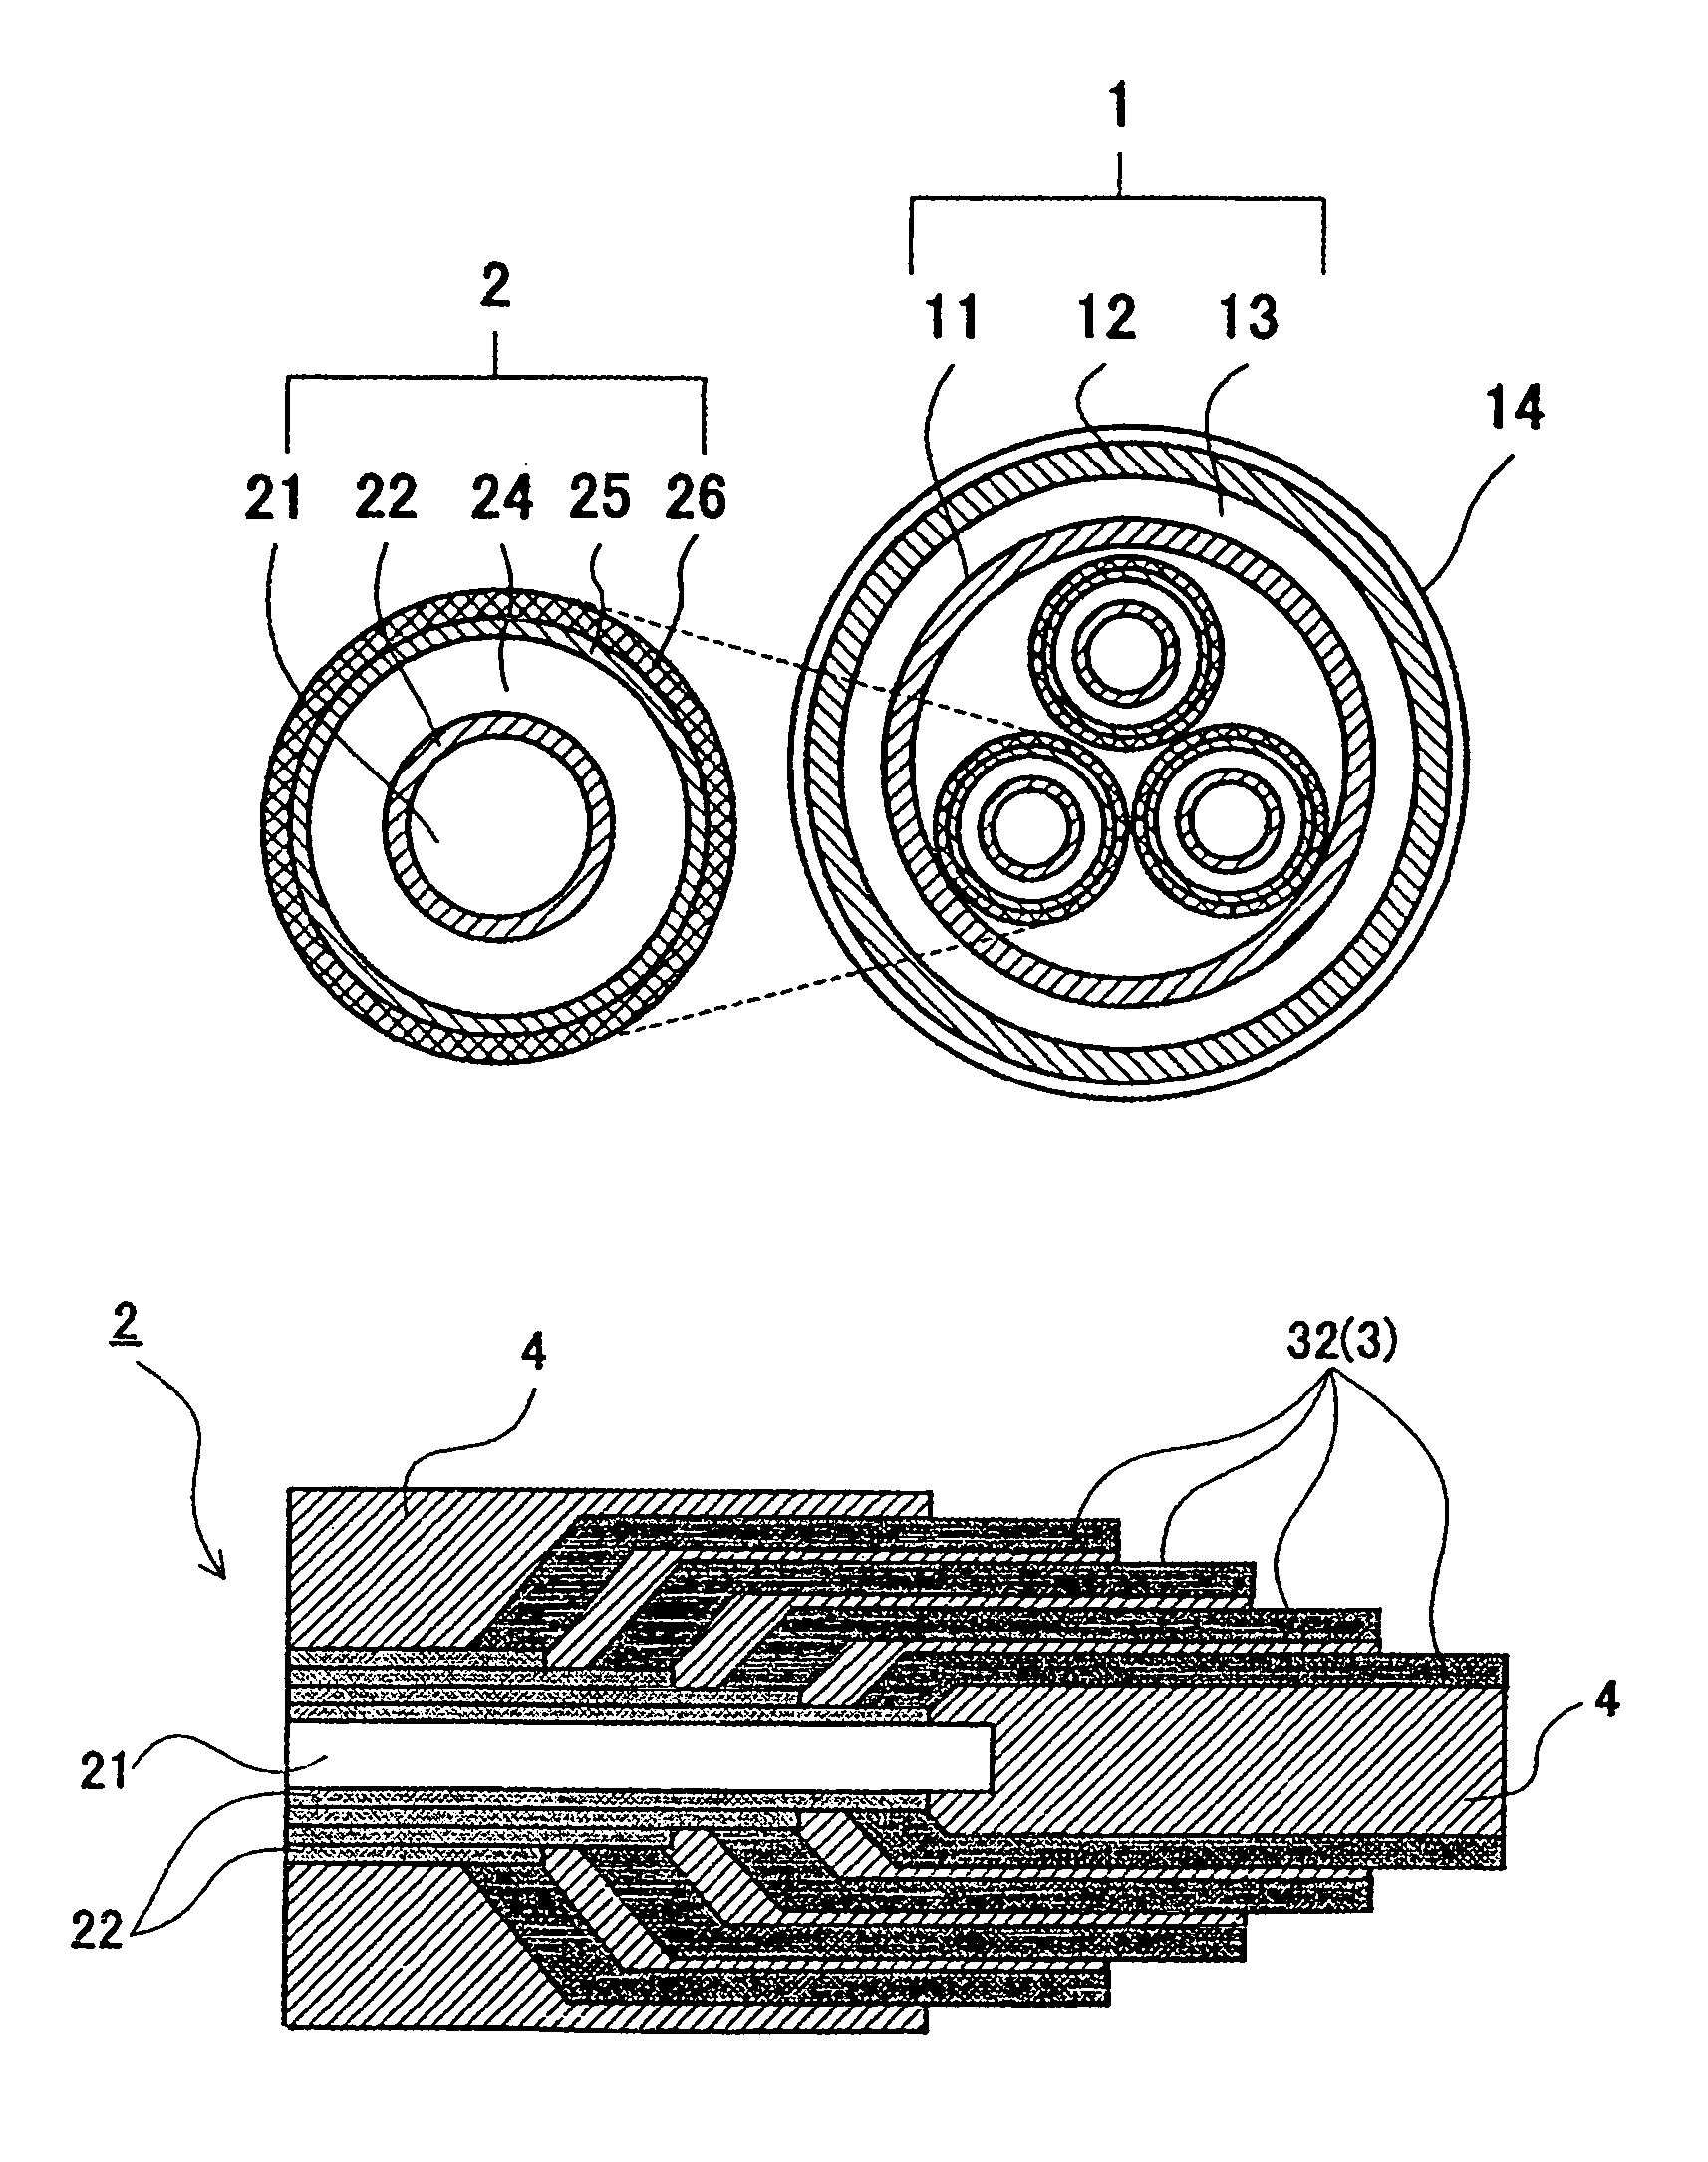 Terminal structure of direct electric current multilayer structure superconducting cable and DC superconducting cable line